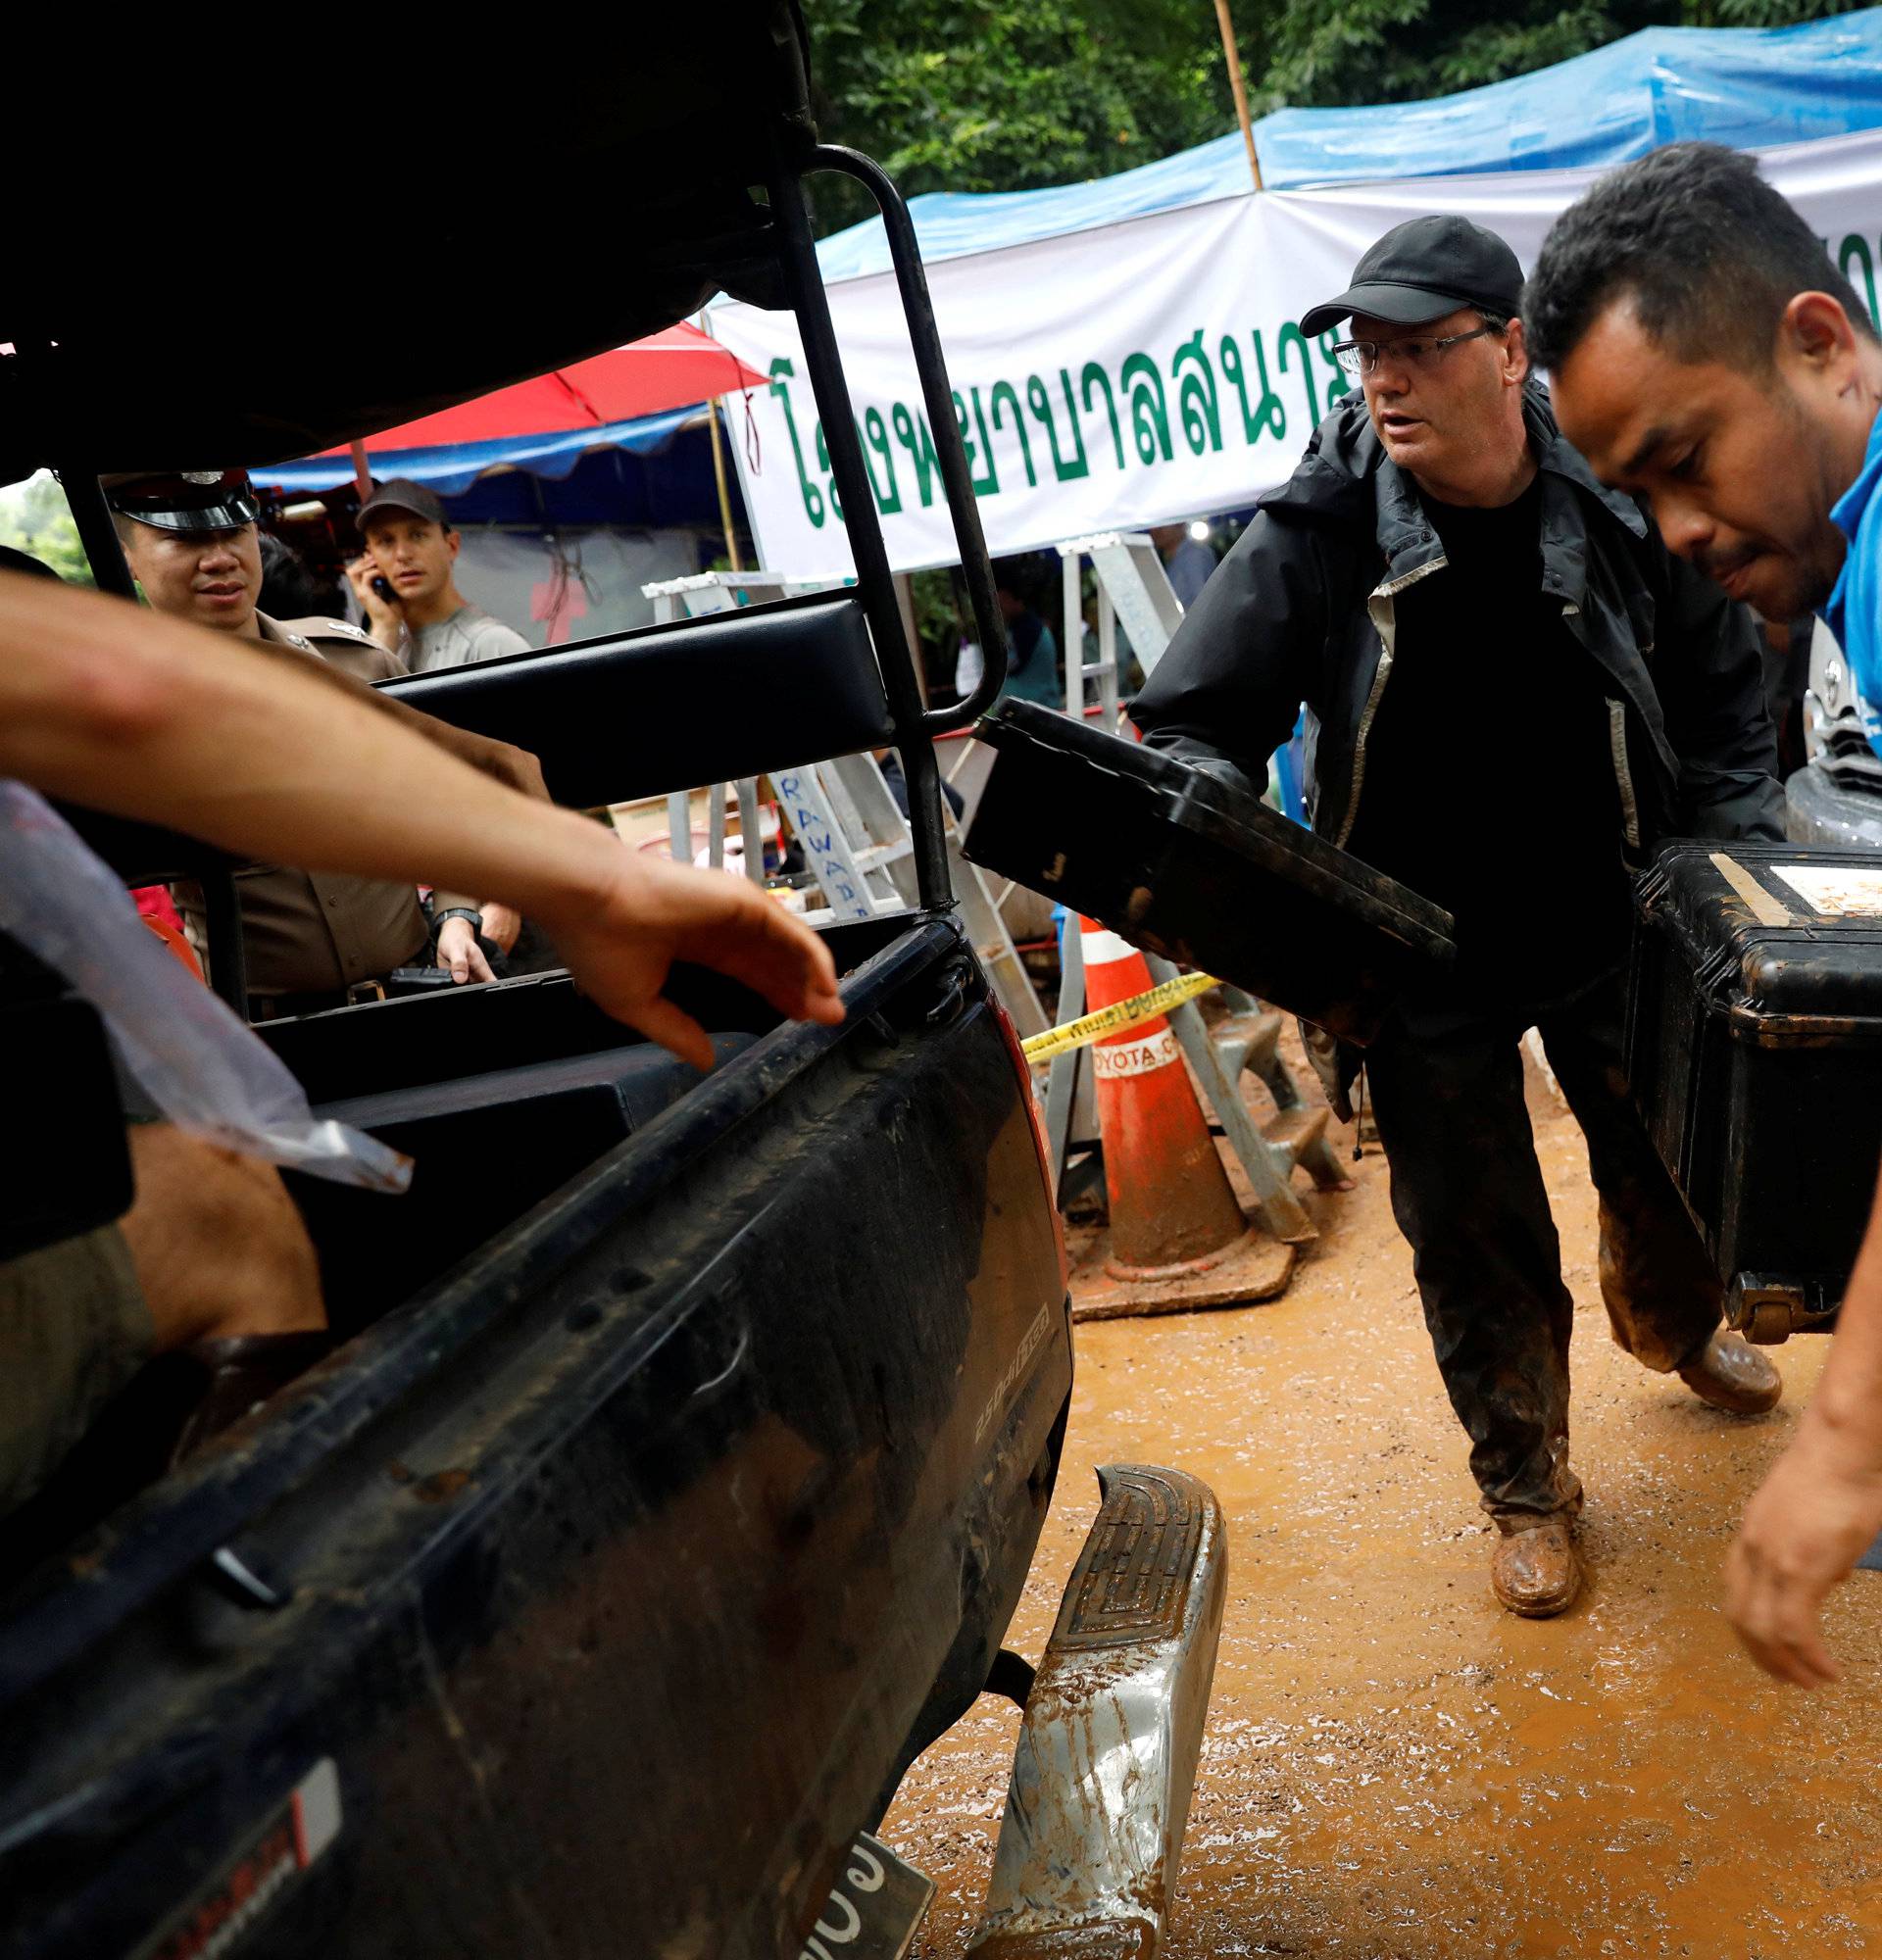 Journalist leave  from Tham Luang cave complex as Thailand government announced all of the media have to move urgently,  in the northern province of Chiang Rai